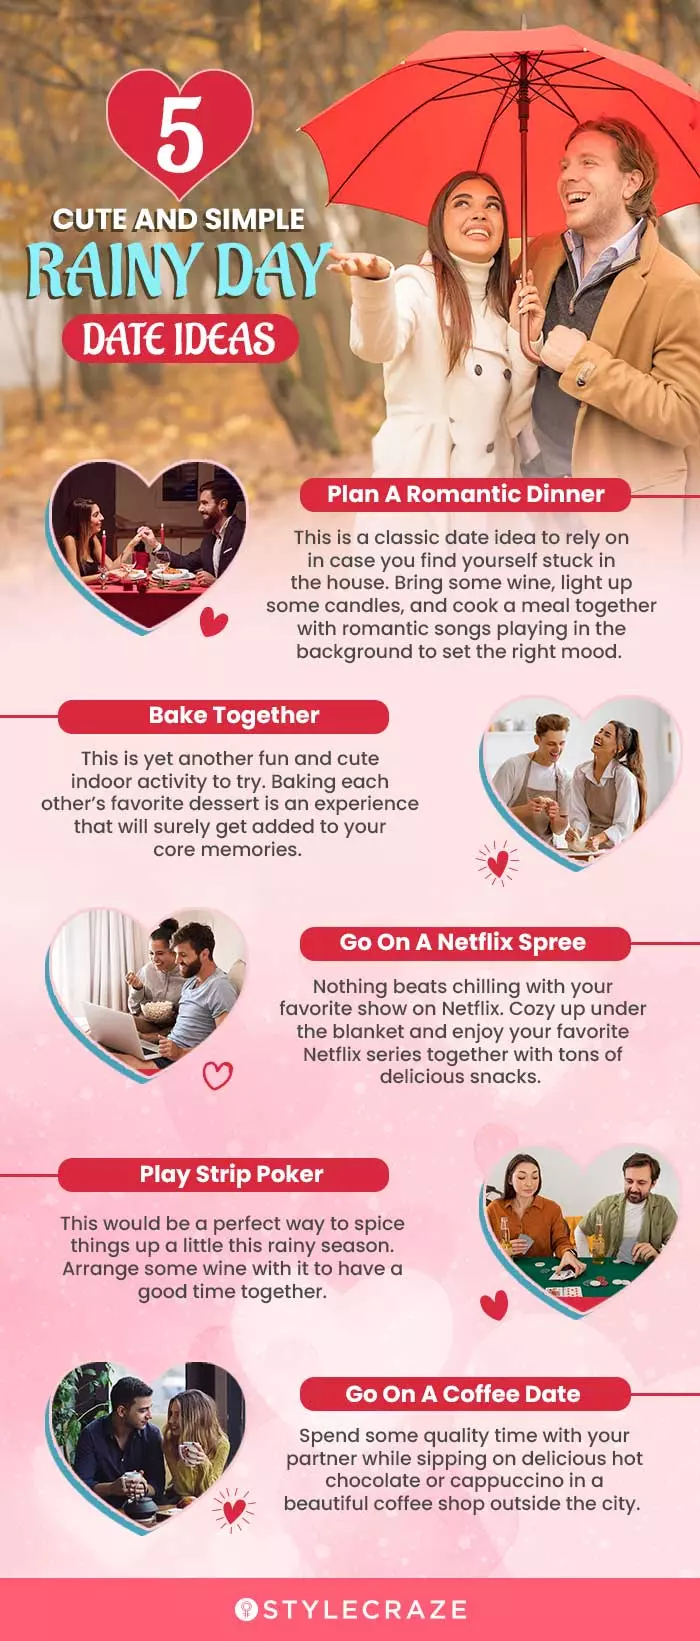 5 cute and simple rainy day date ideas (infographic)